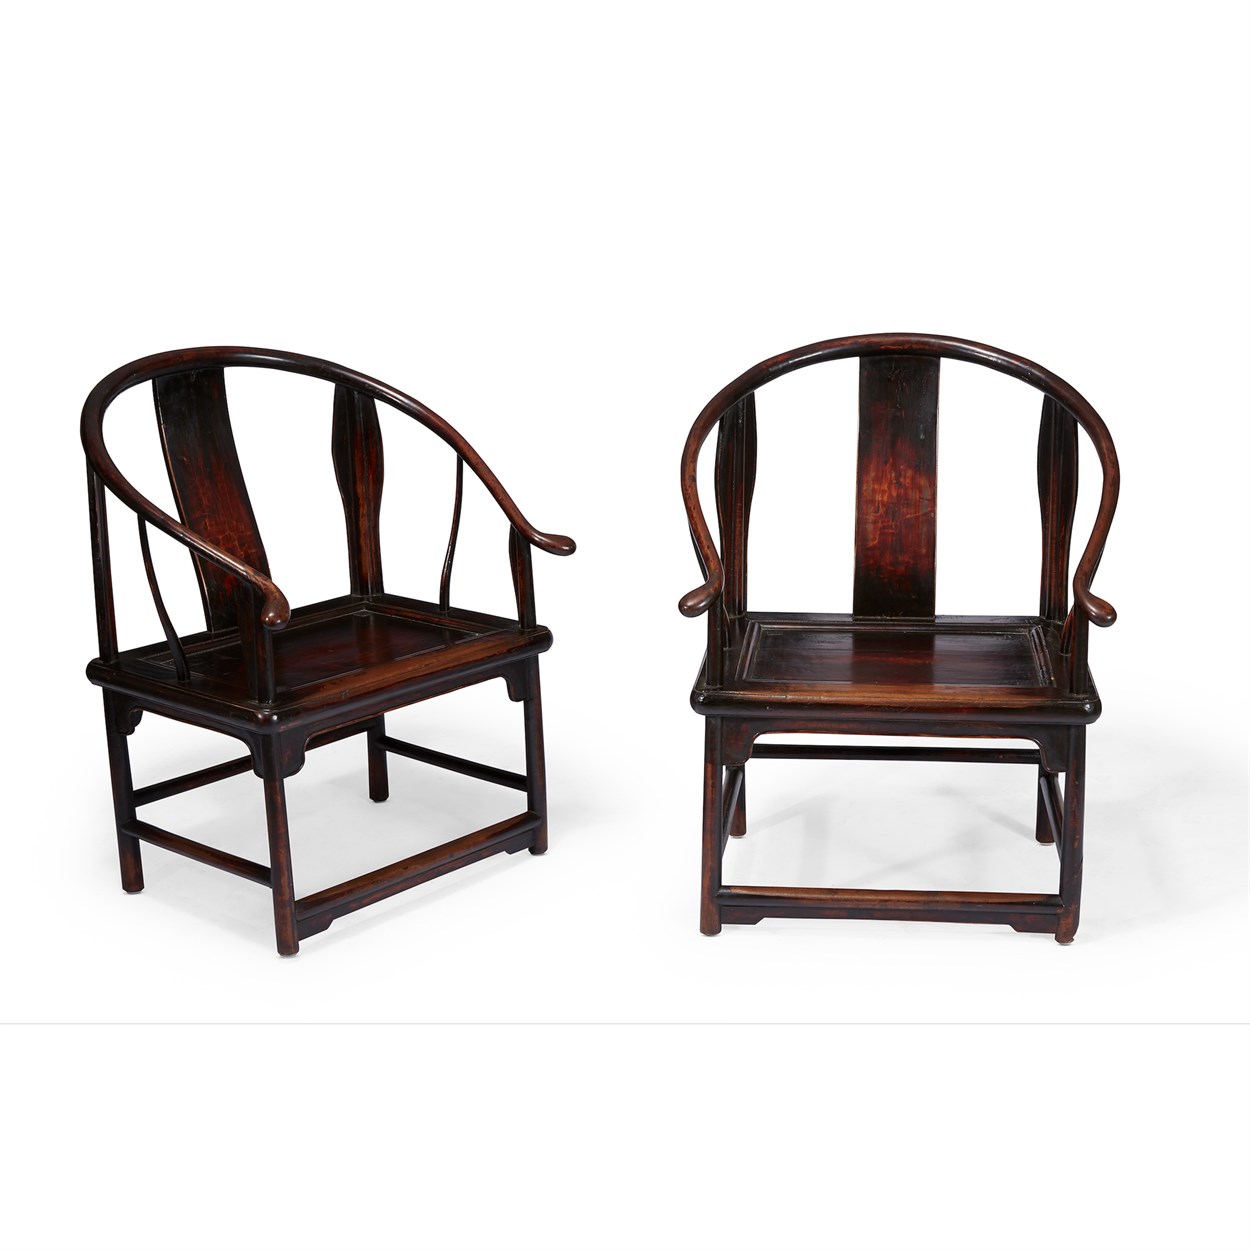 Lot 178 - A pair of Chinese lacquered wood horseshoe-back armchairs, quan yi